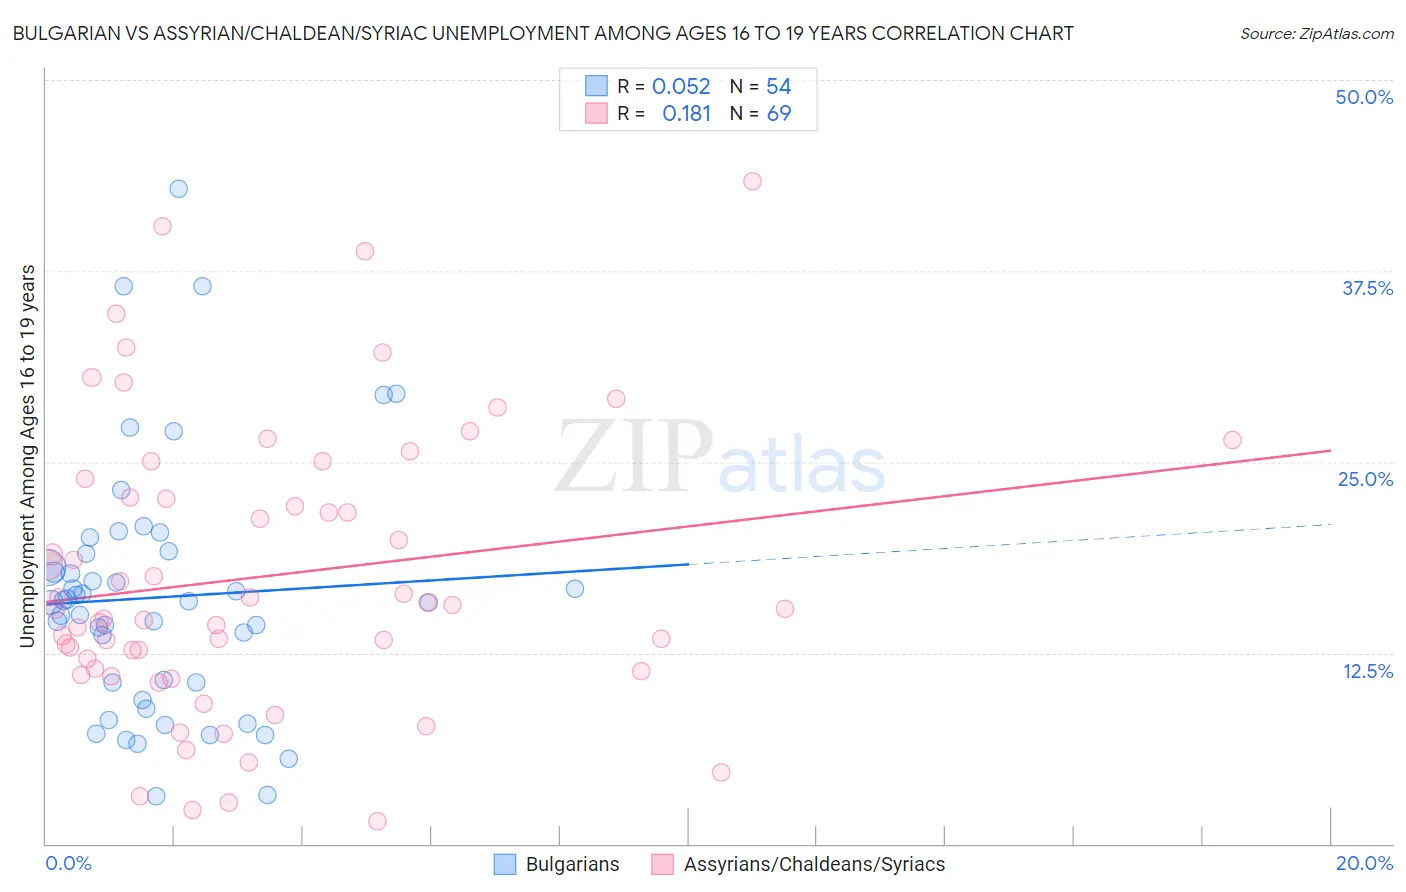 Bulgarian vs Assyrian/Chaldean/Syriac Unemployment Among Ages 16 to 19 years